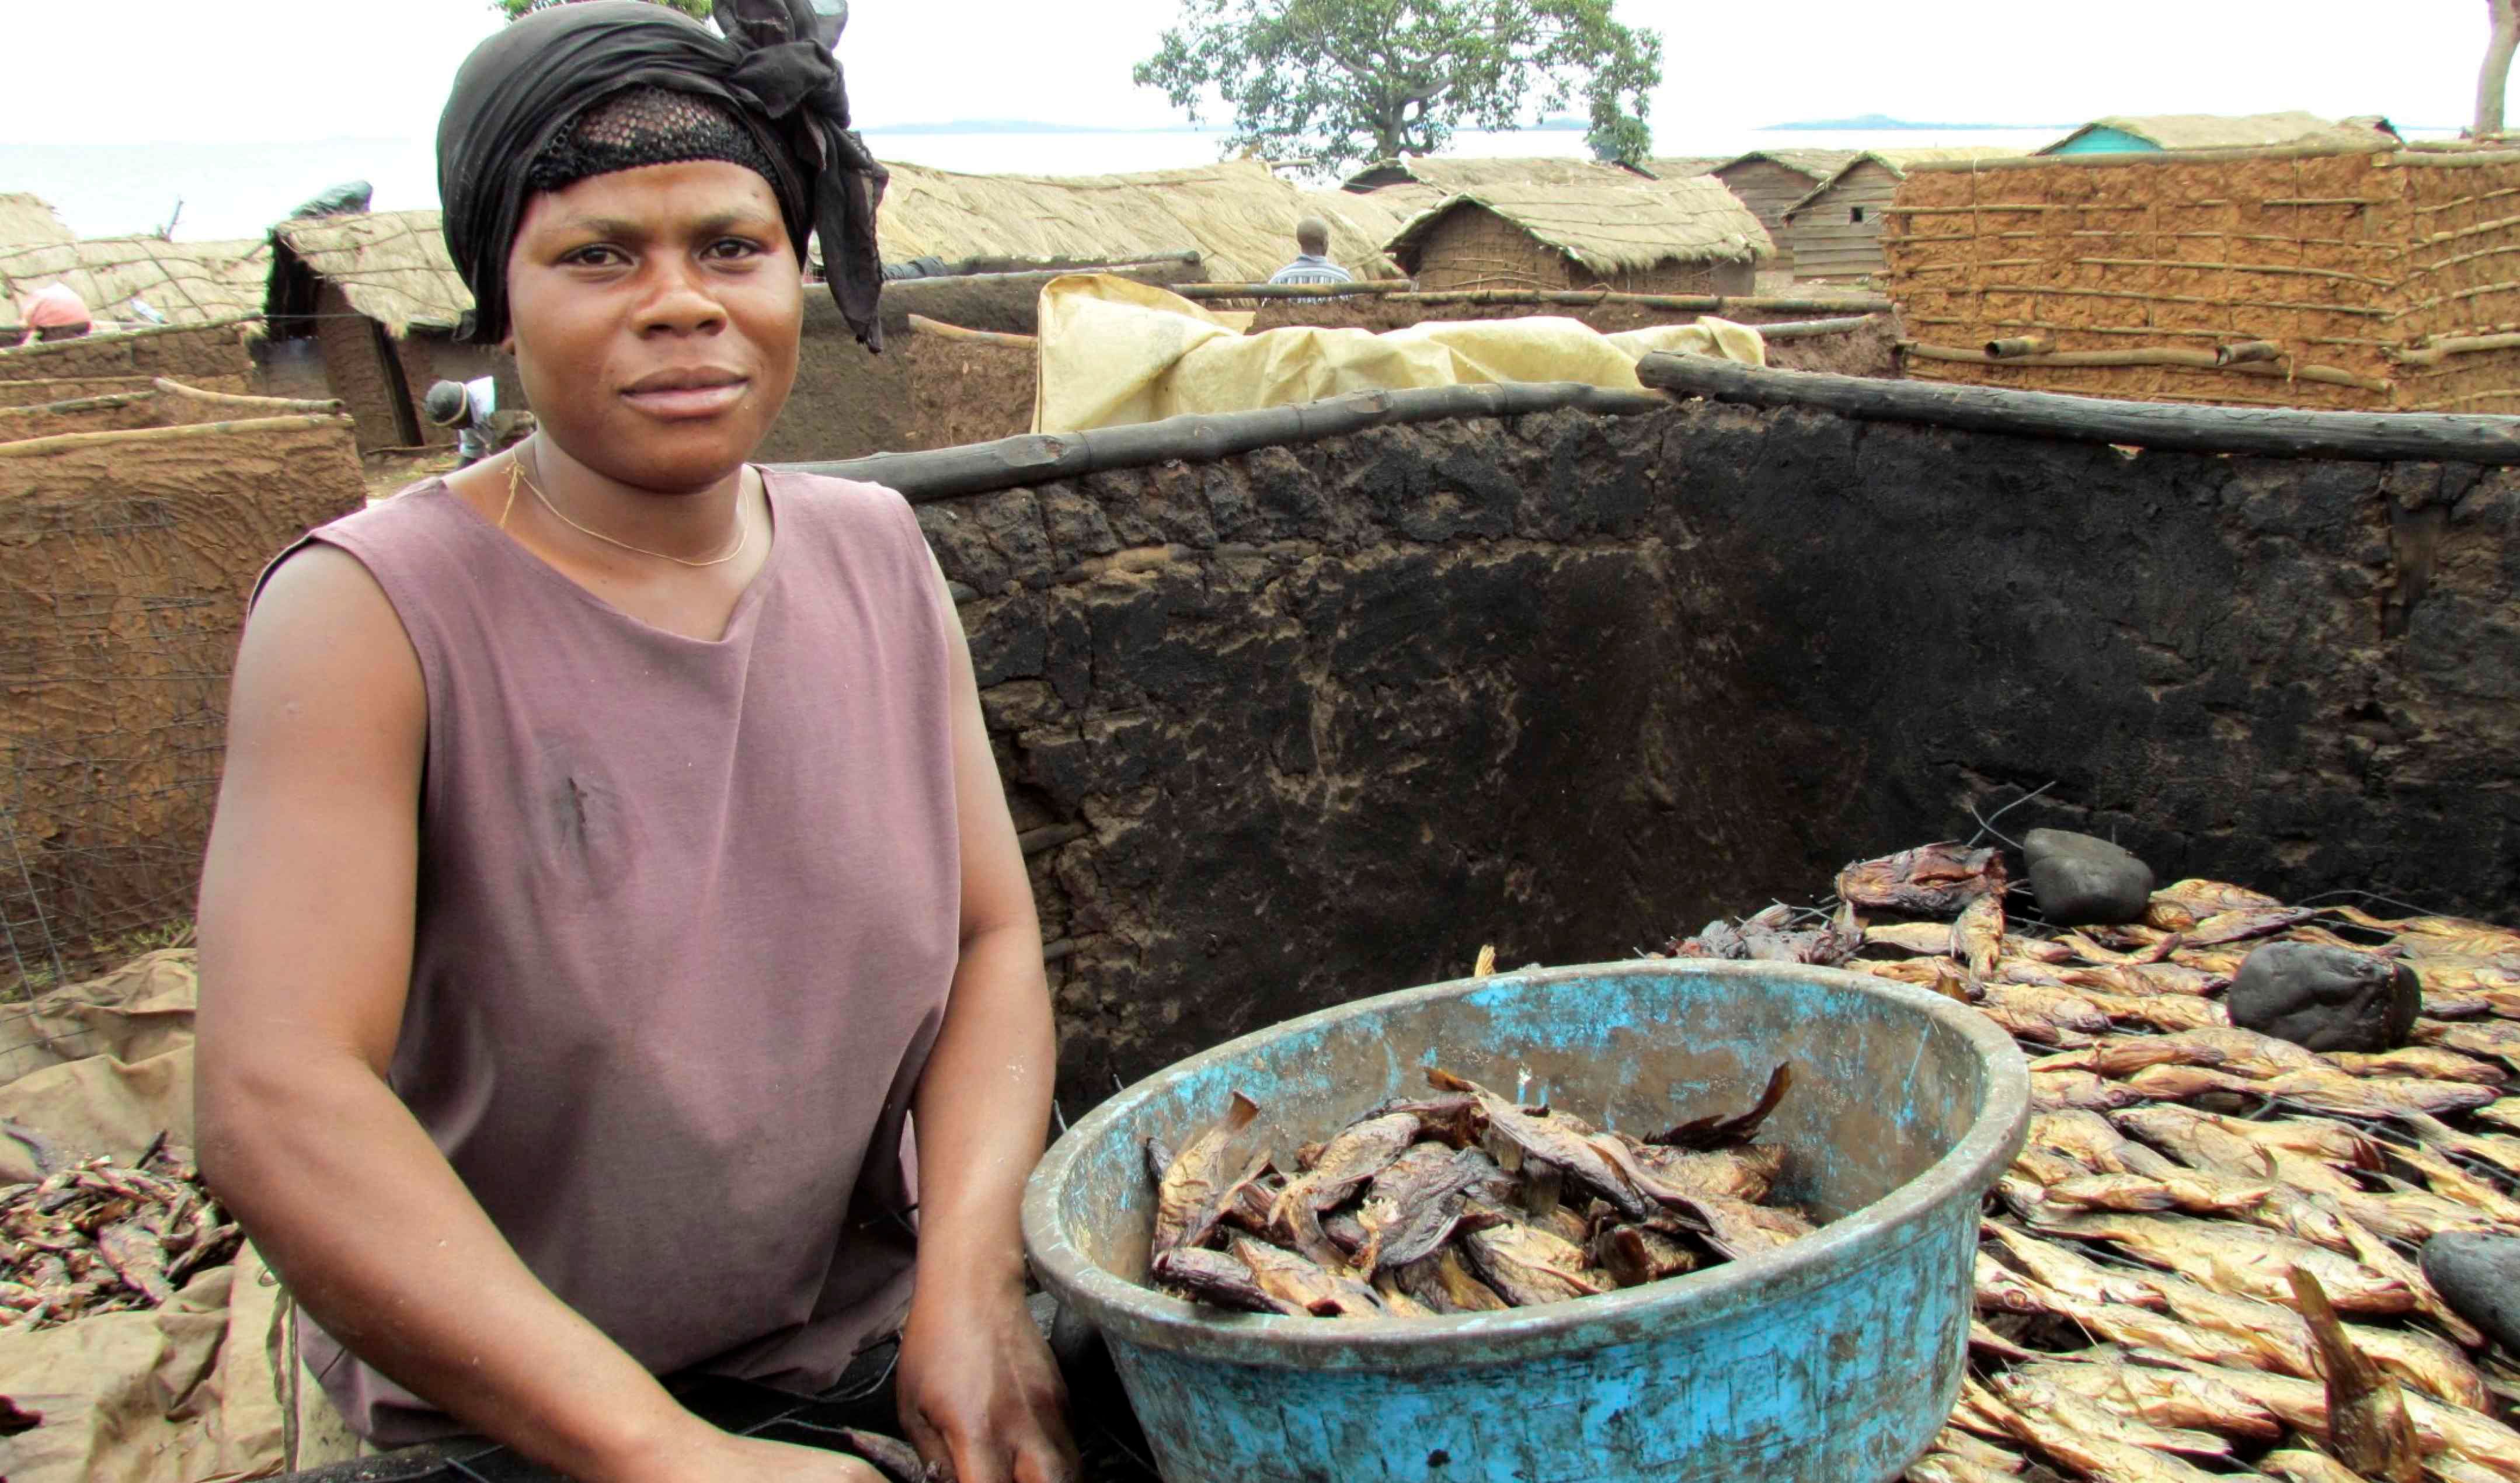 Entebbe lady dry curing the fish for food longevity